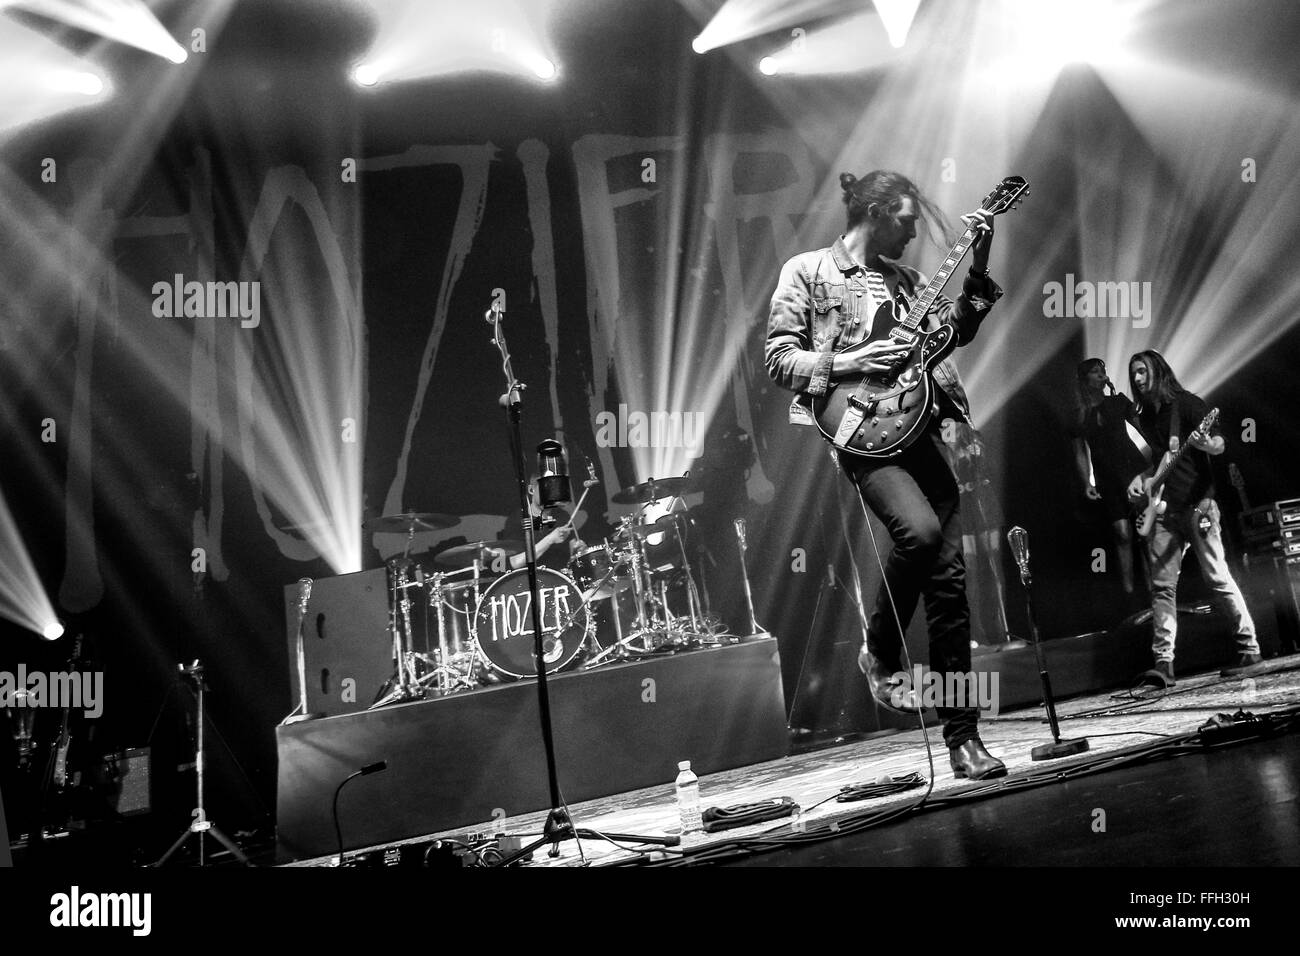 Die live at Manchesters O2 Apollo Hozier. Stockfoto